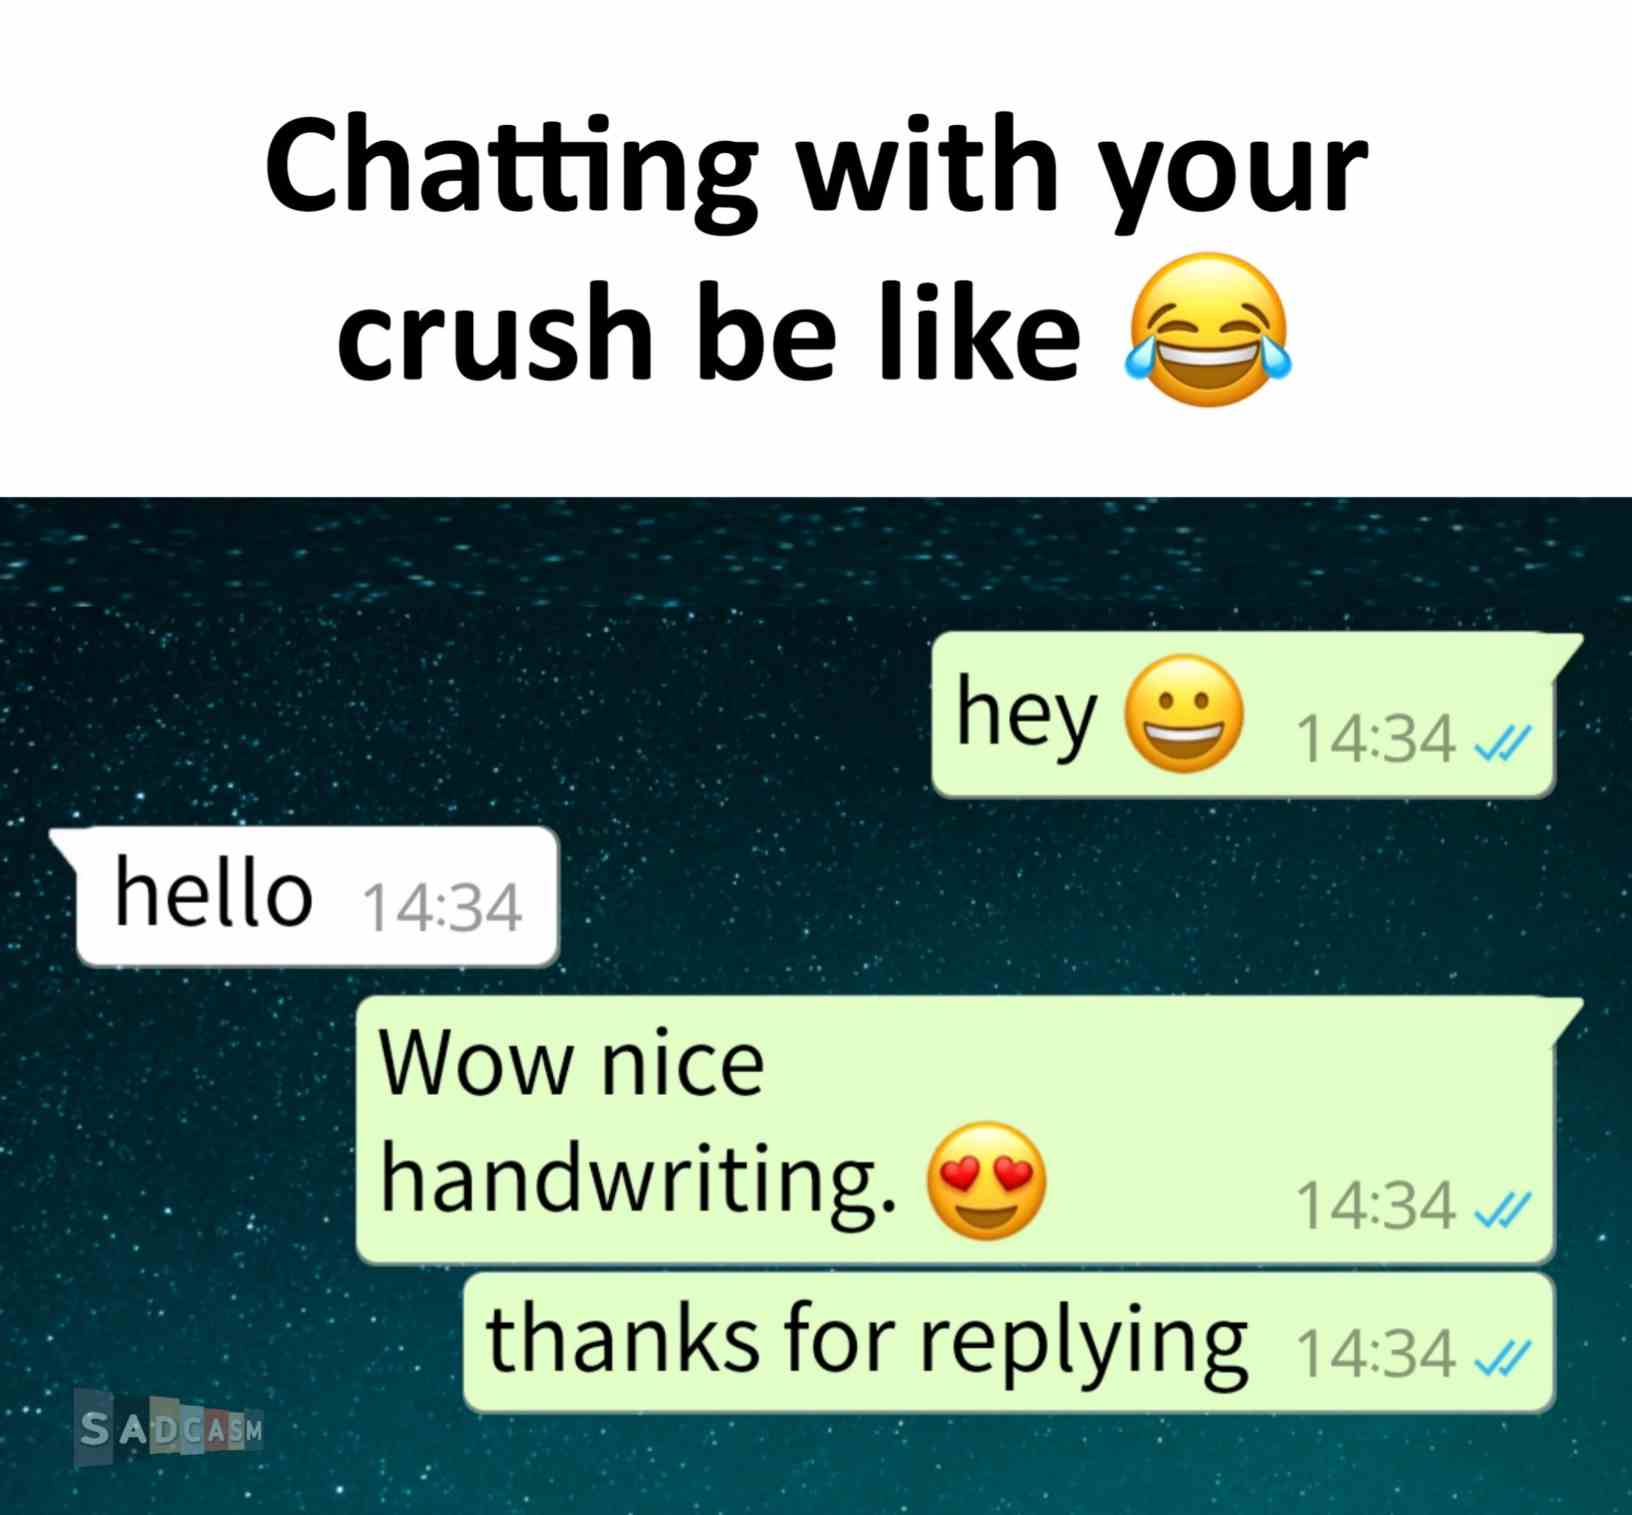 Chatting with your crush be like